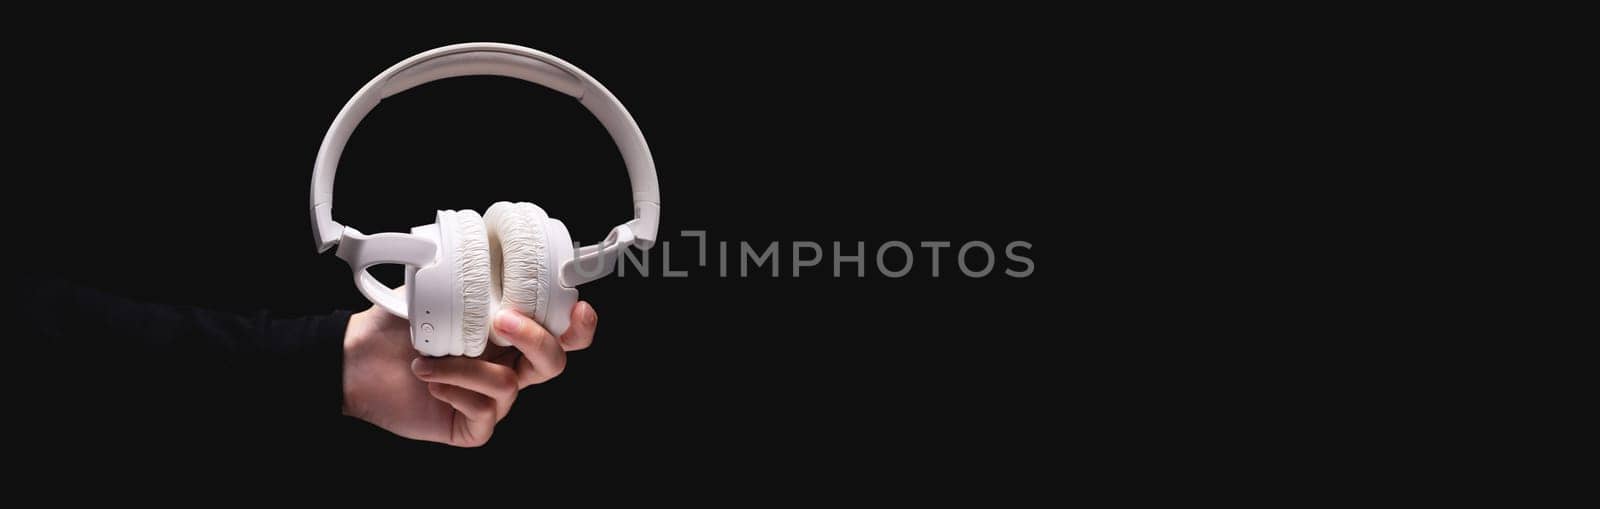 white headphones in a woman's outstretched hand on a dark background, banner for advertising by yanik88